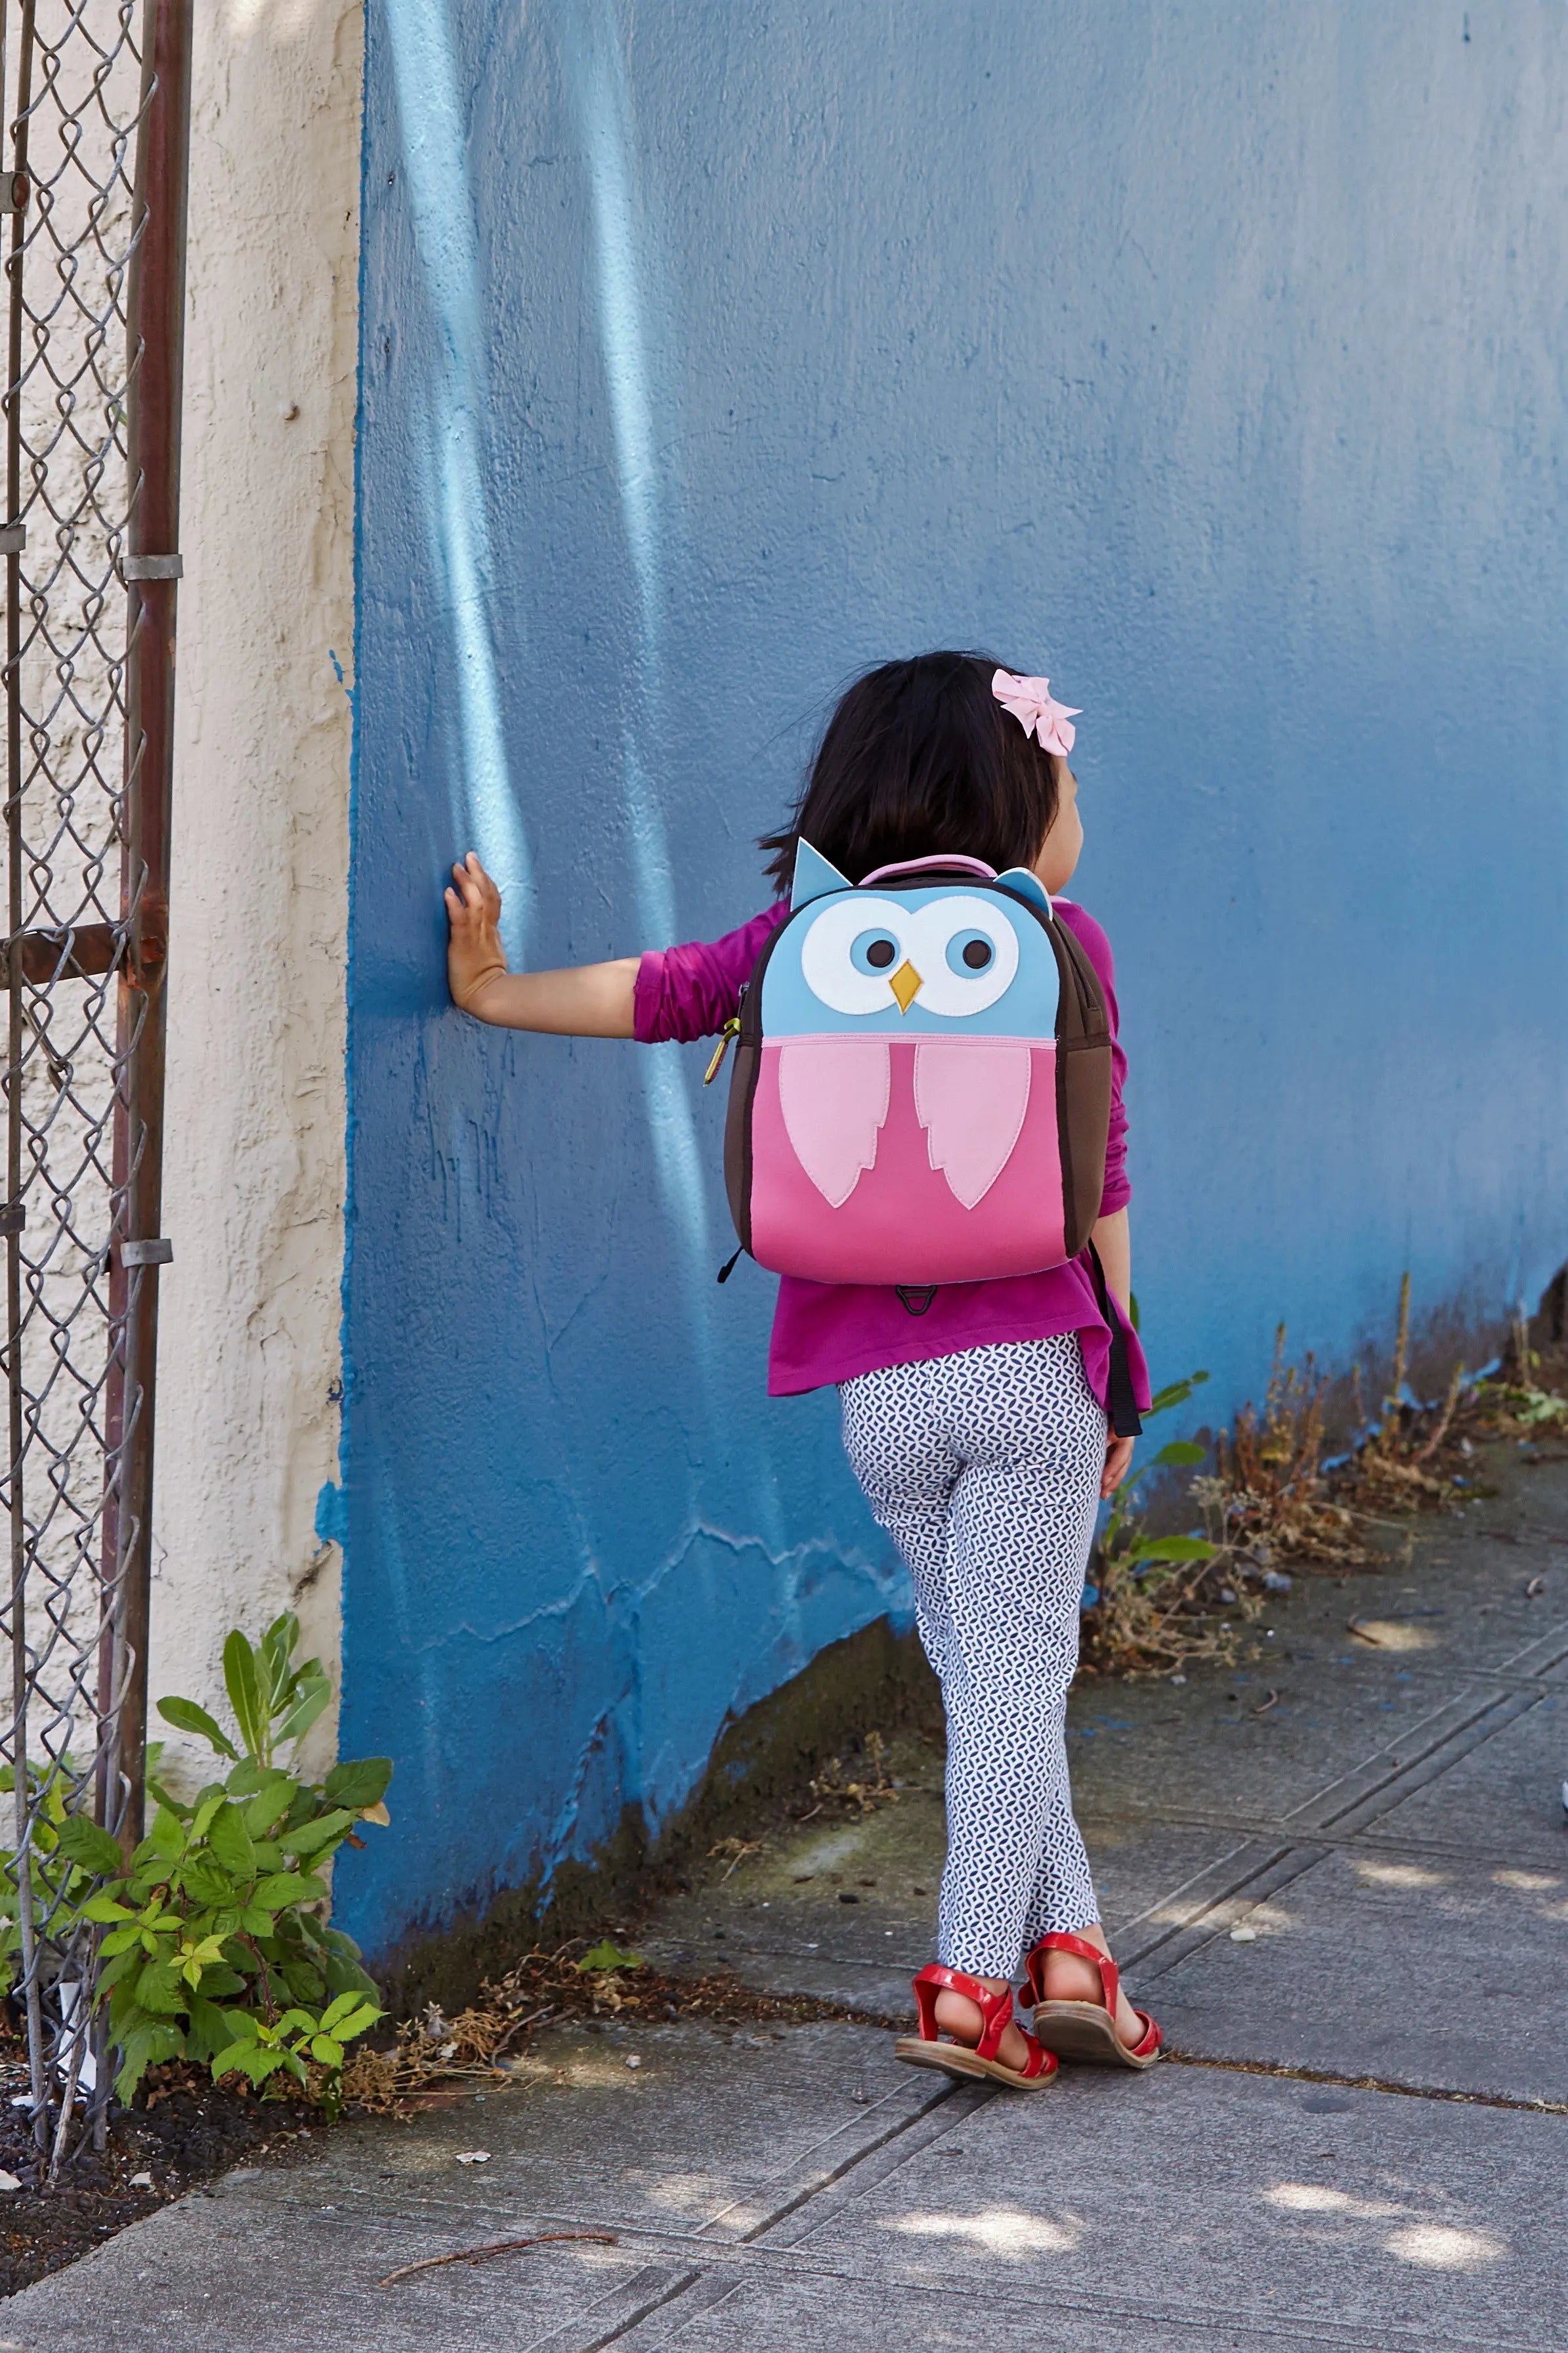 Hoot Owl Harness Toddler Backpack - Brown and Pink,Safety Harness Toddler Harness BP Dabbawalla   